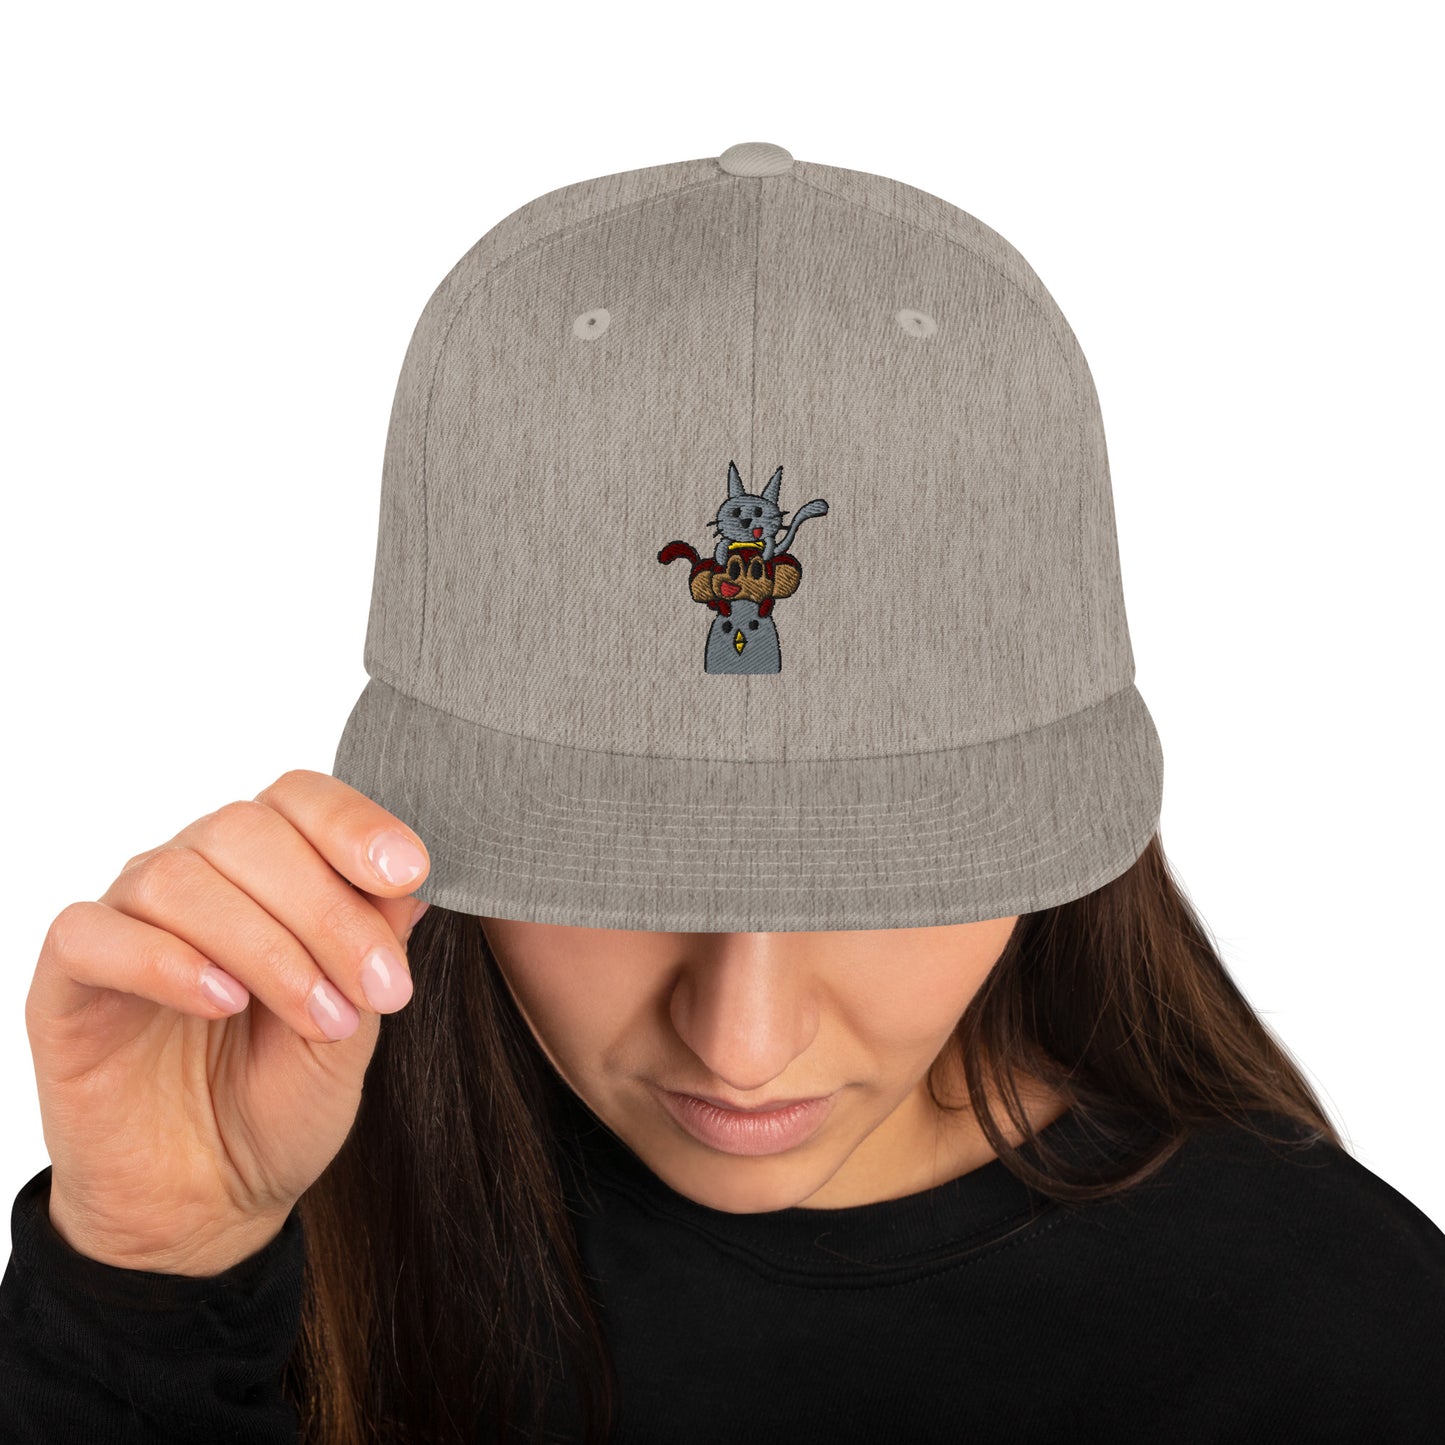 Snapback Hat -The Rocco Effect